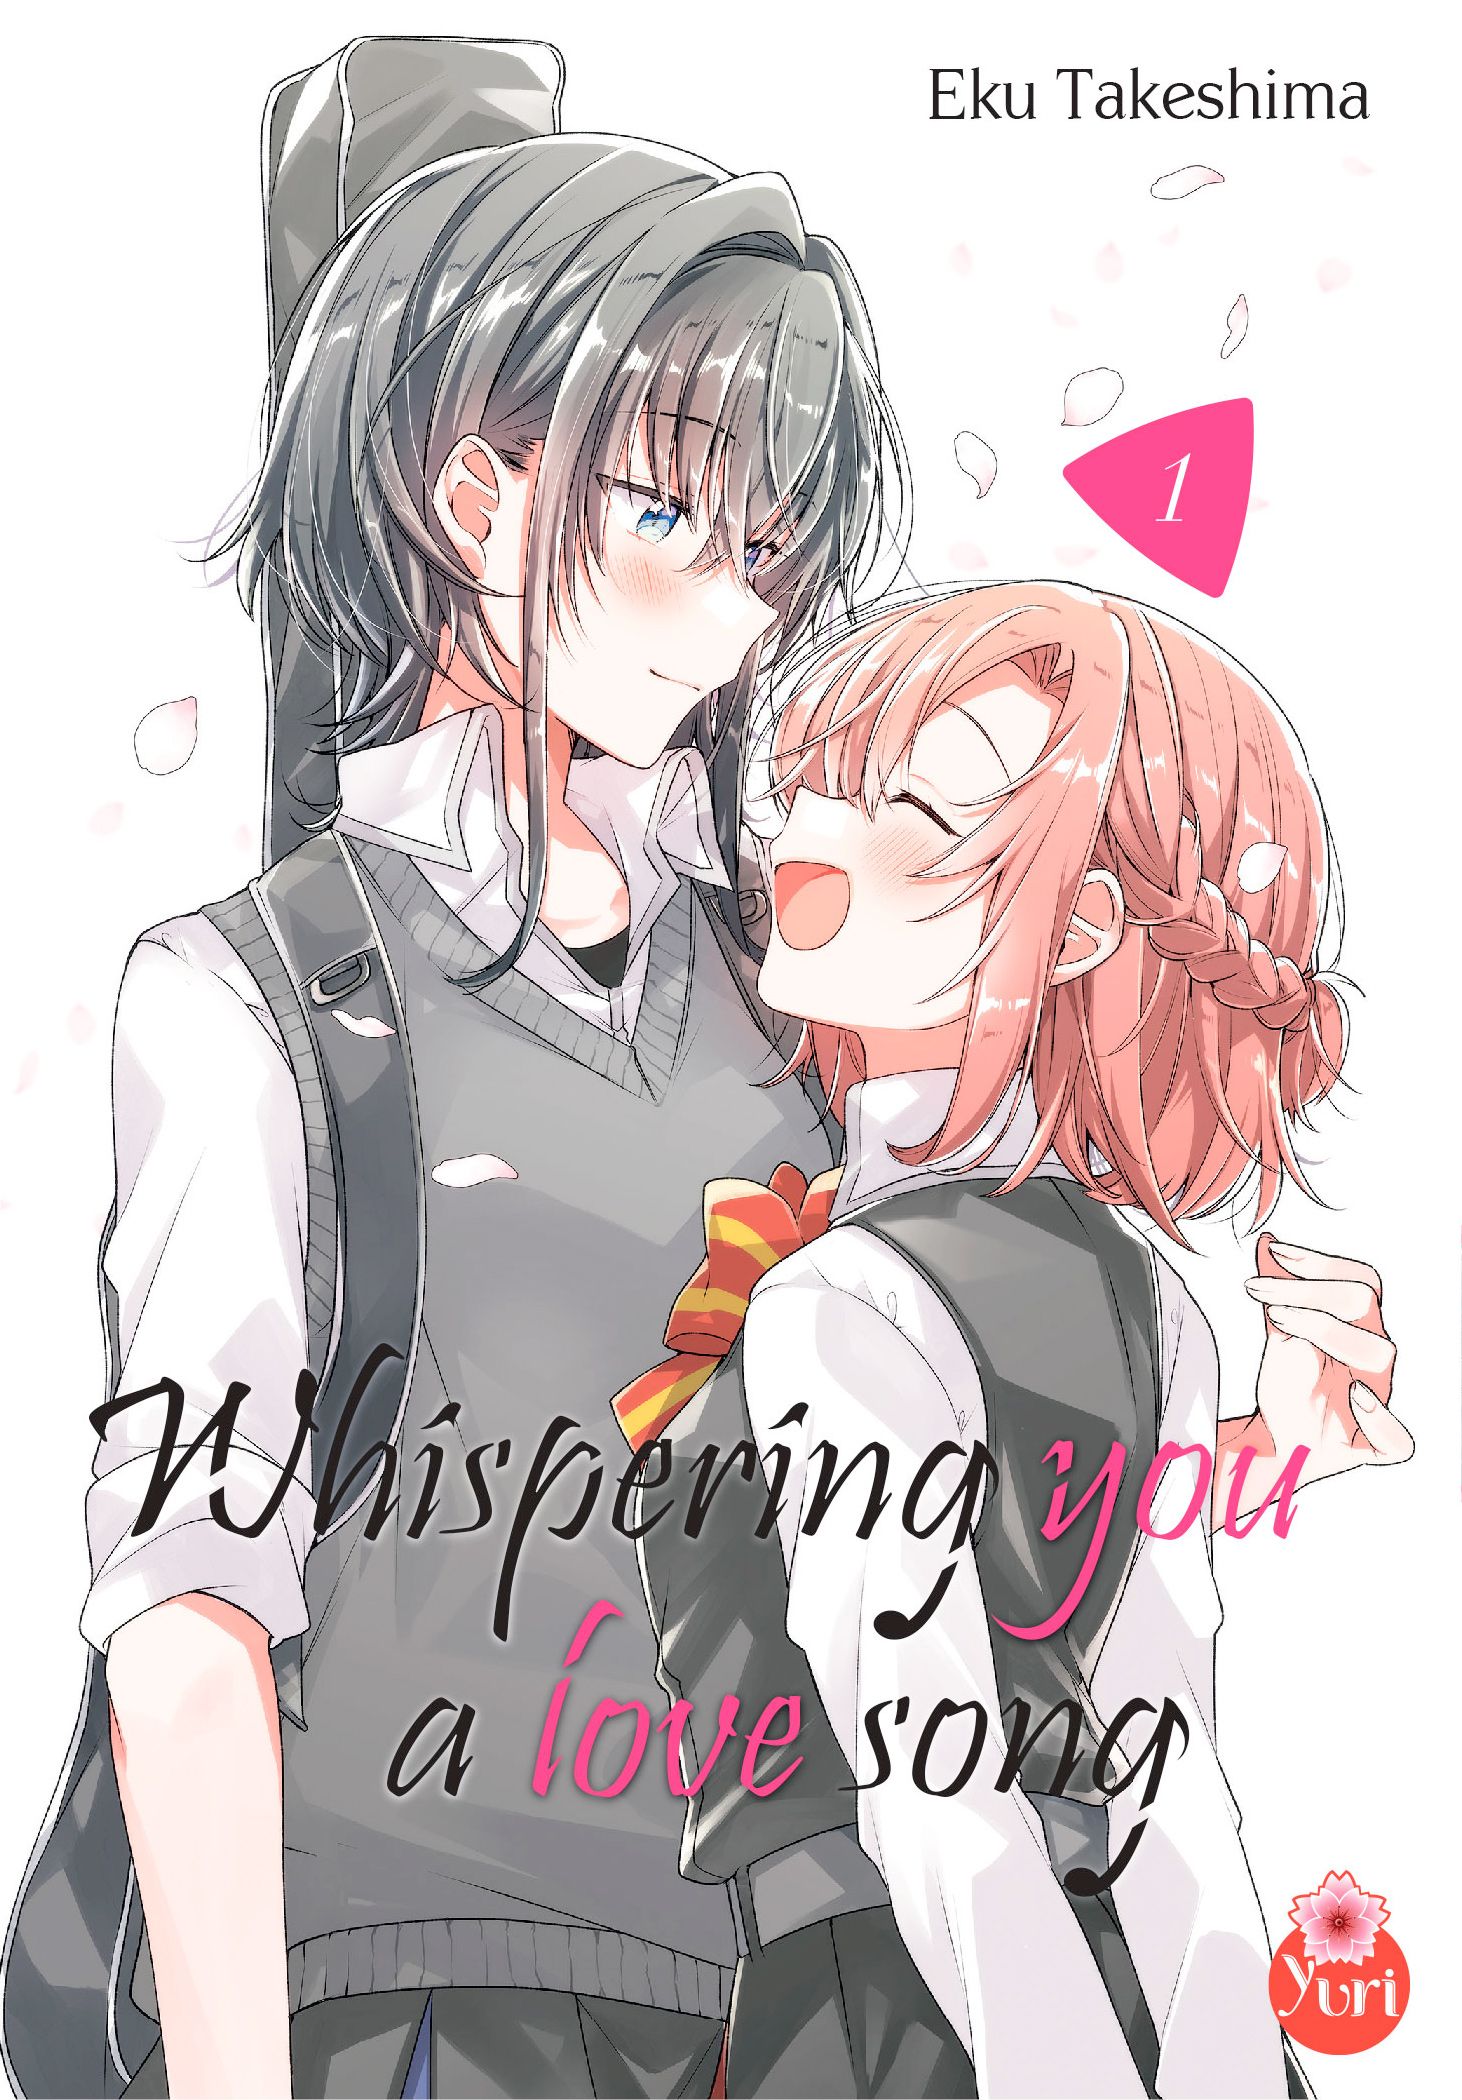 Whispering you a love song – Tome 1